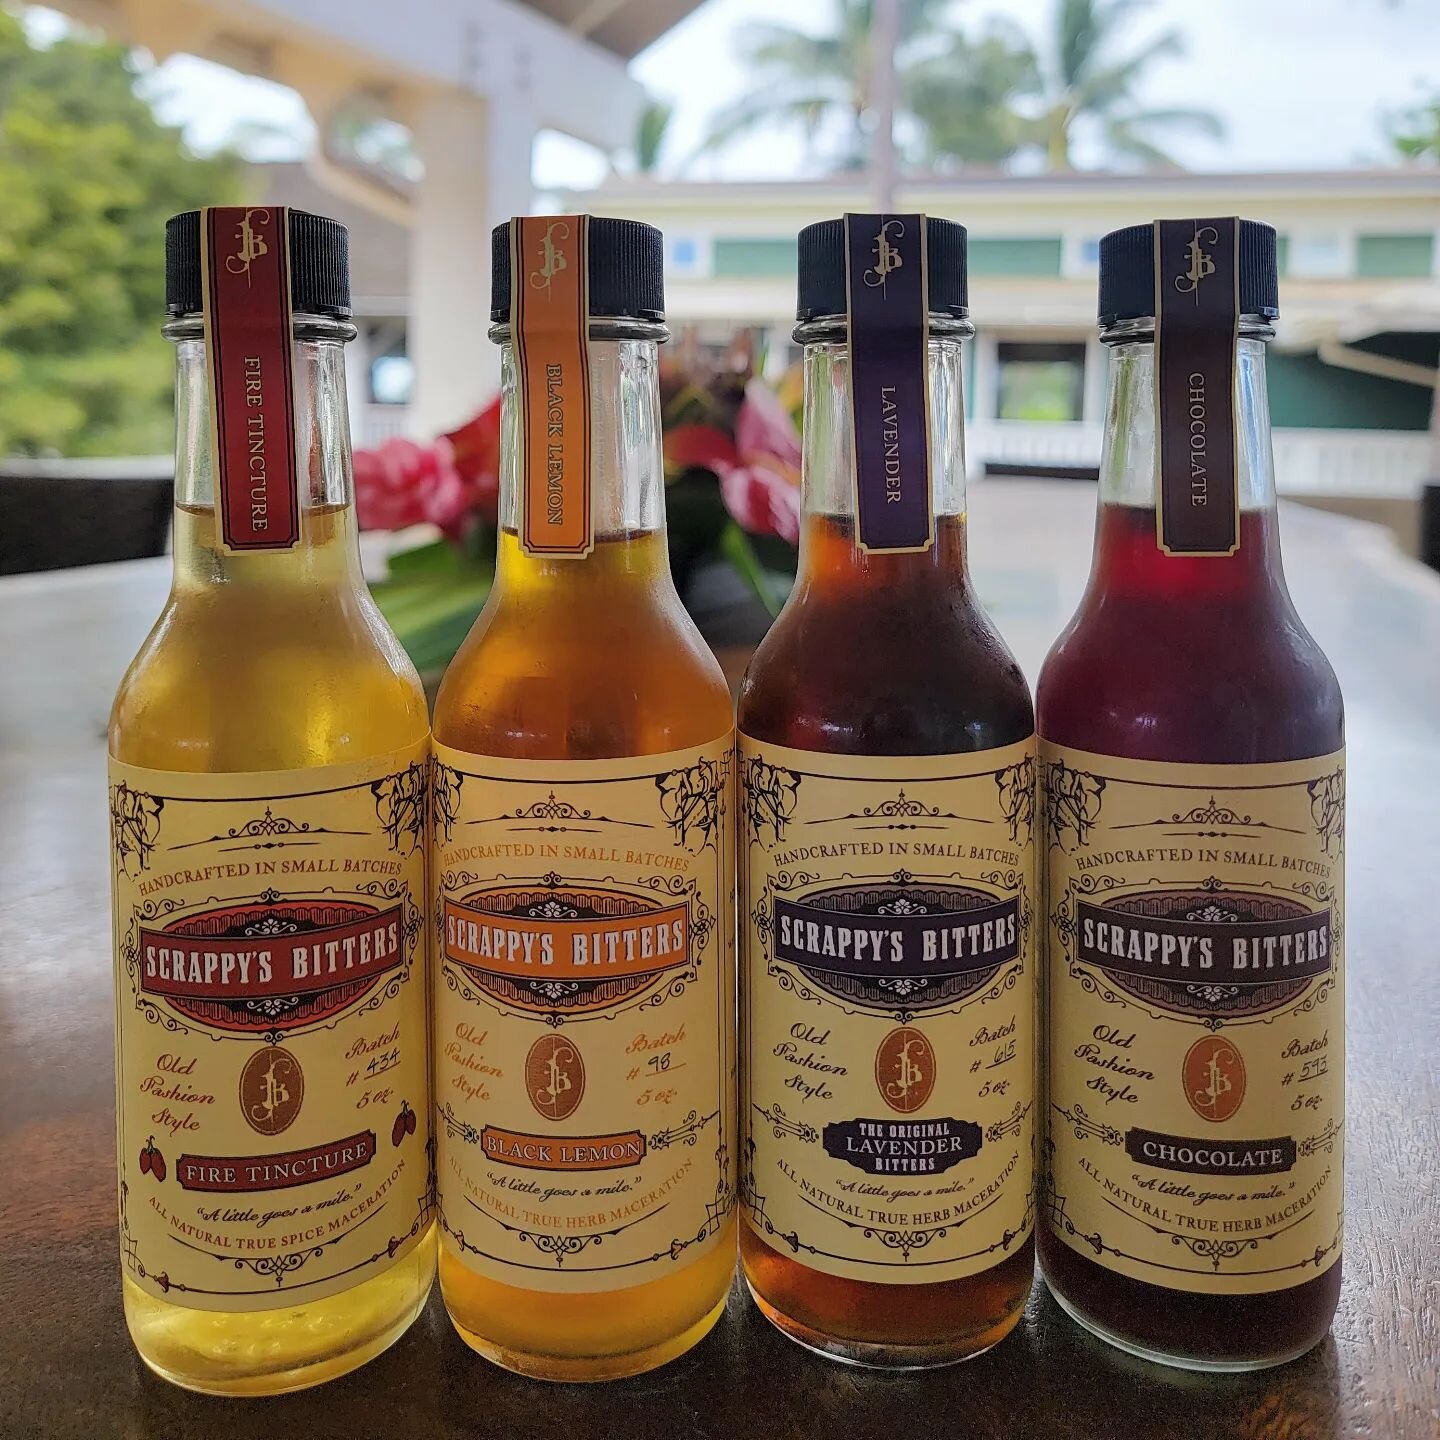 We Love Scrappy's Bitters! 

At Scrappy&rsquo;s, they select the finest herbs and zest all of their fresh citruses by hand, never using oils or extracts. Every batch they make uses organic ingredients of the highest quality with no artificial flavors